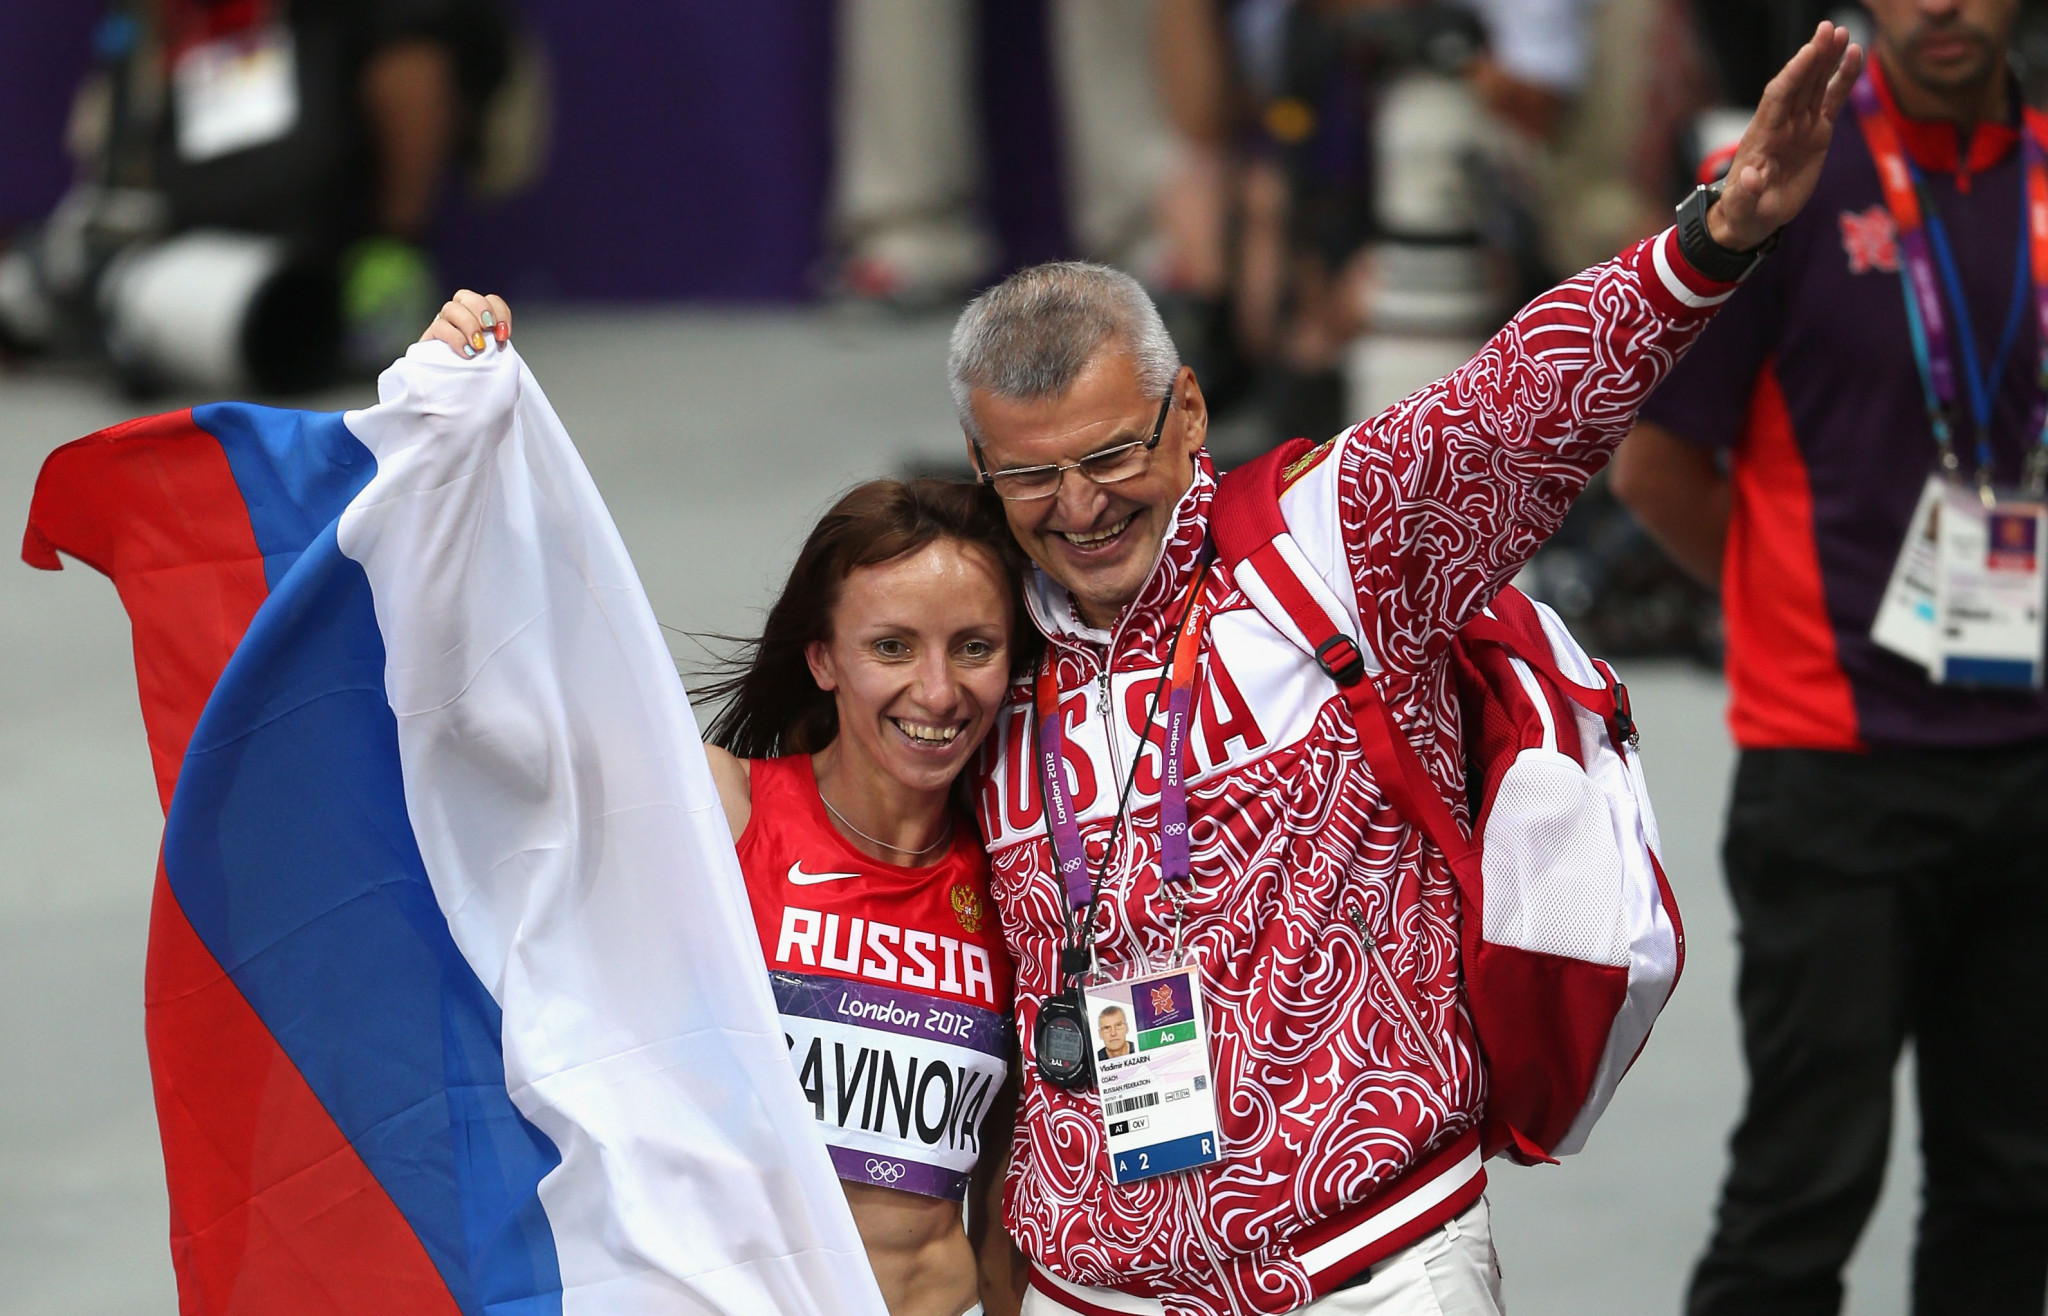 Vladimir Kazarin, pictured with Maria Savinova at London 2012 after she won the 800 metres - a title she was subsequently stripped of for doping - was banned from athletics for life in 2017 ©Getty Images